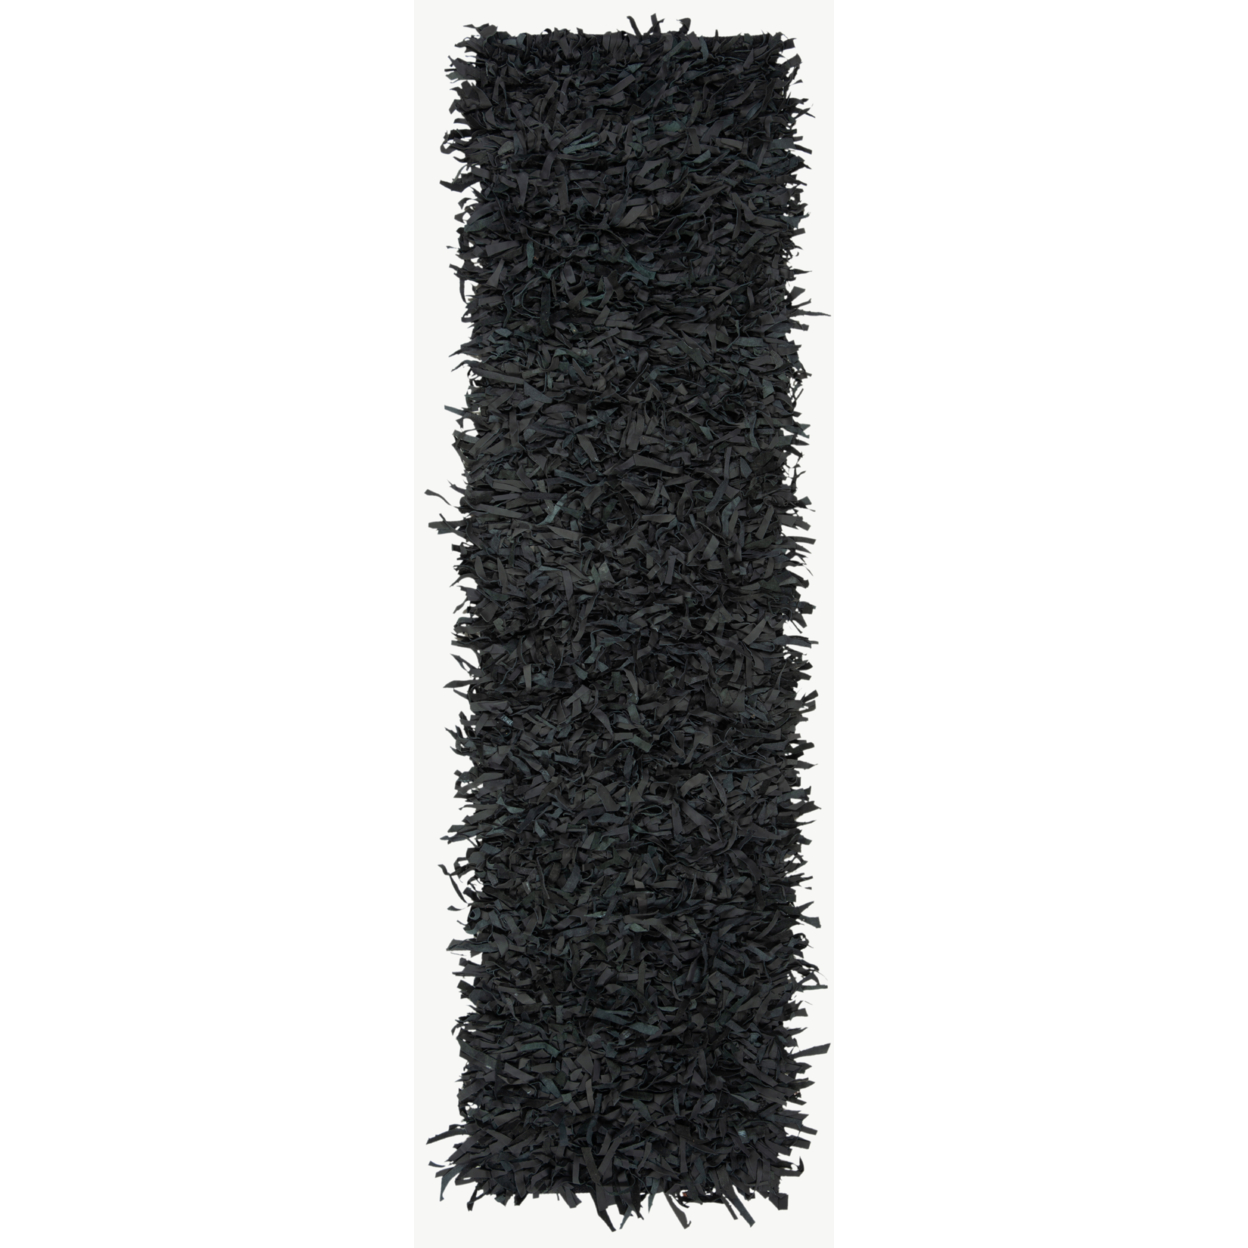 SAFAVIEH Leather Shag LSG601A Hand-knotted Black Rug - 8' X 10'